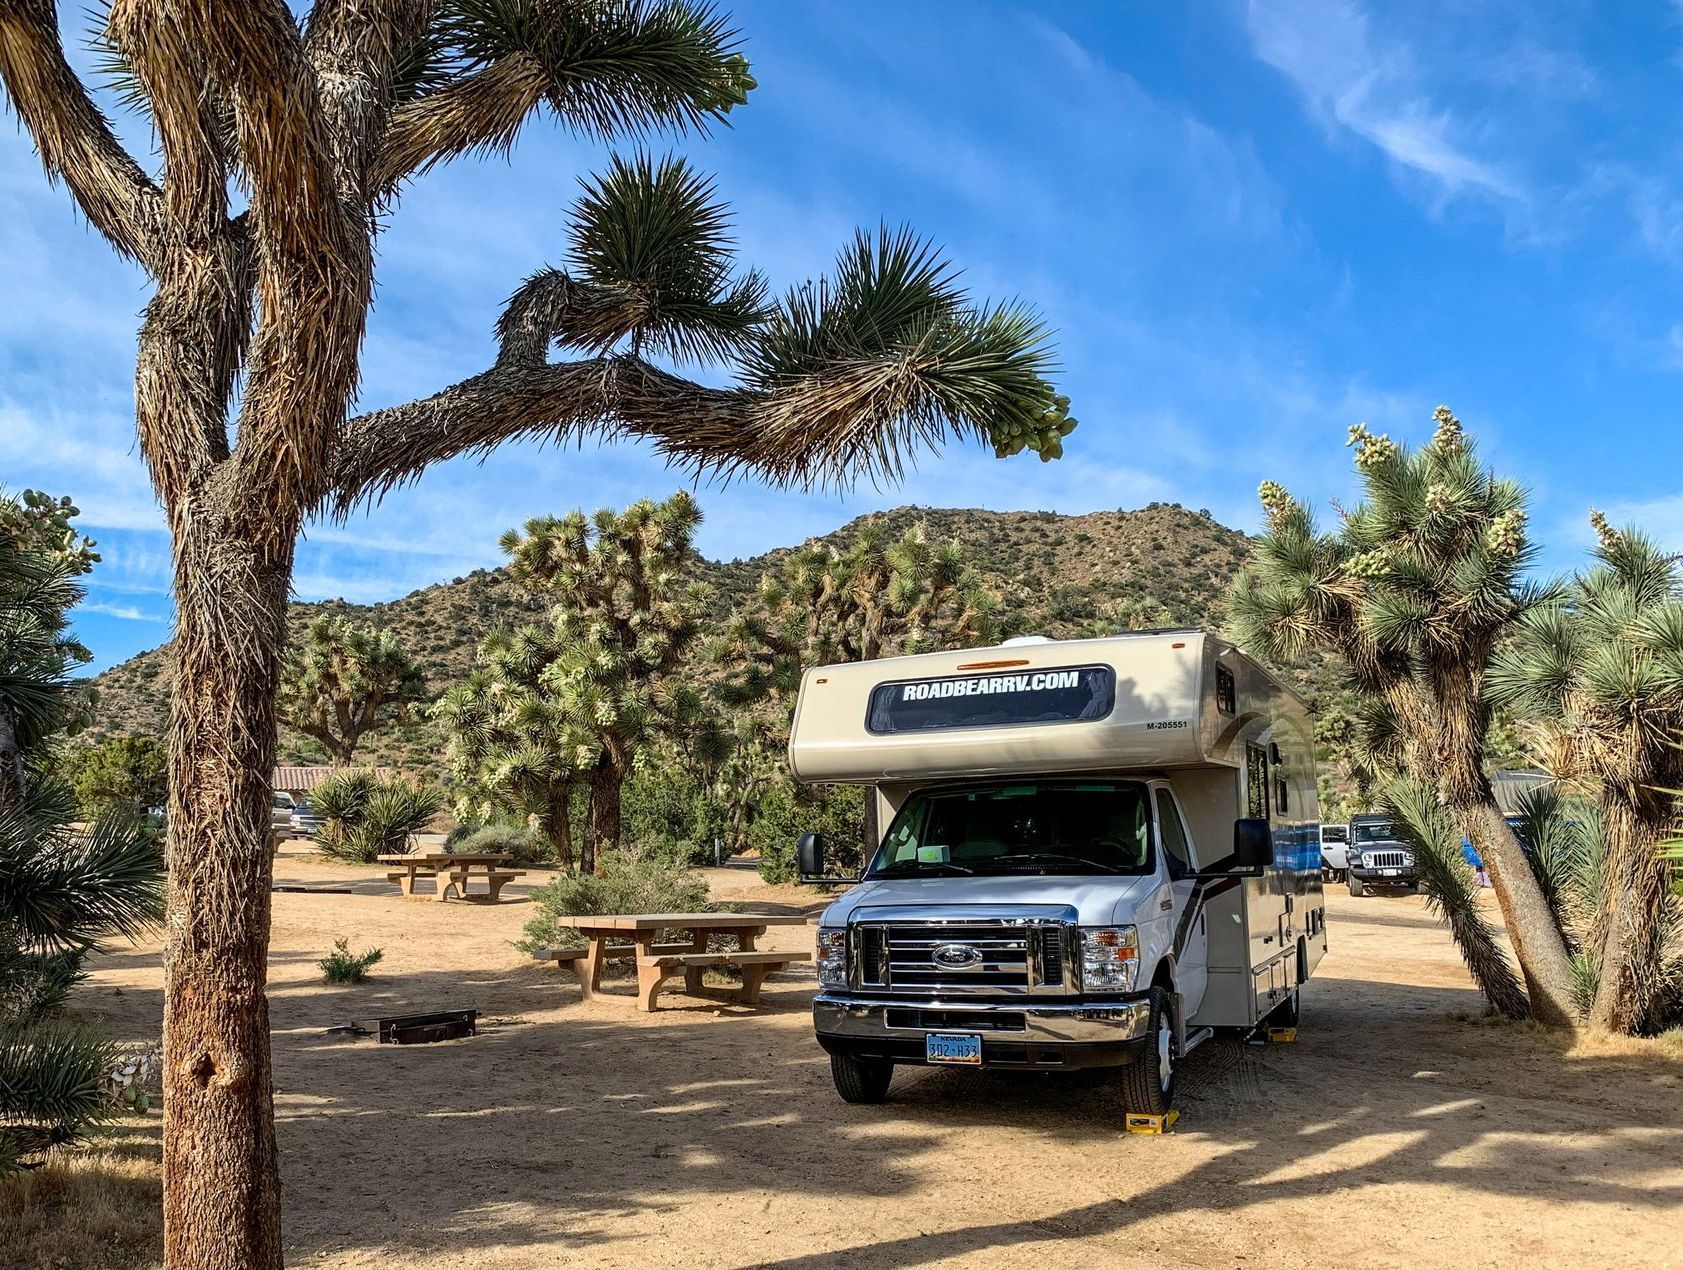 a road bear rv is parked in the desert